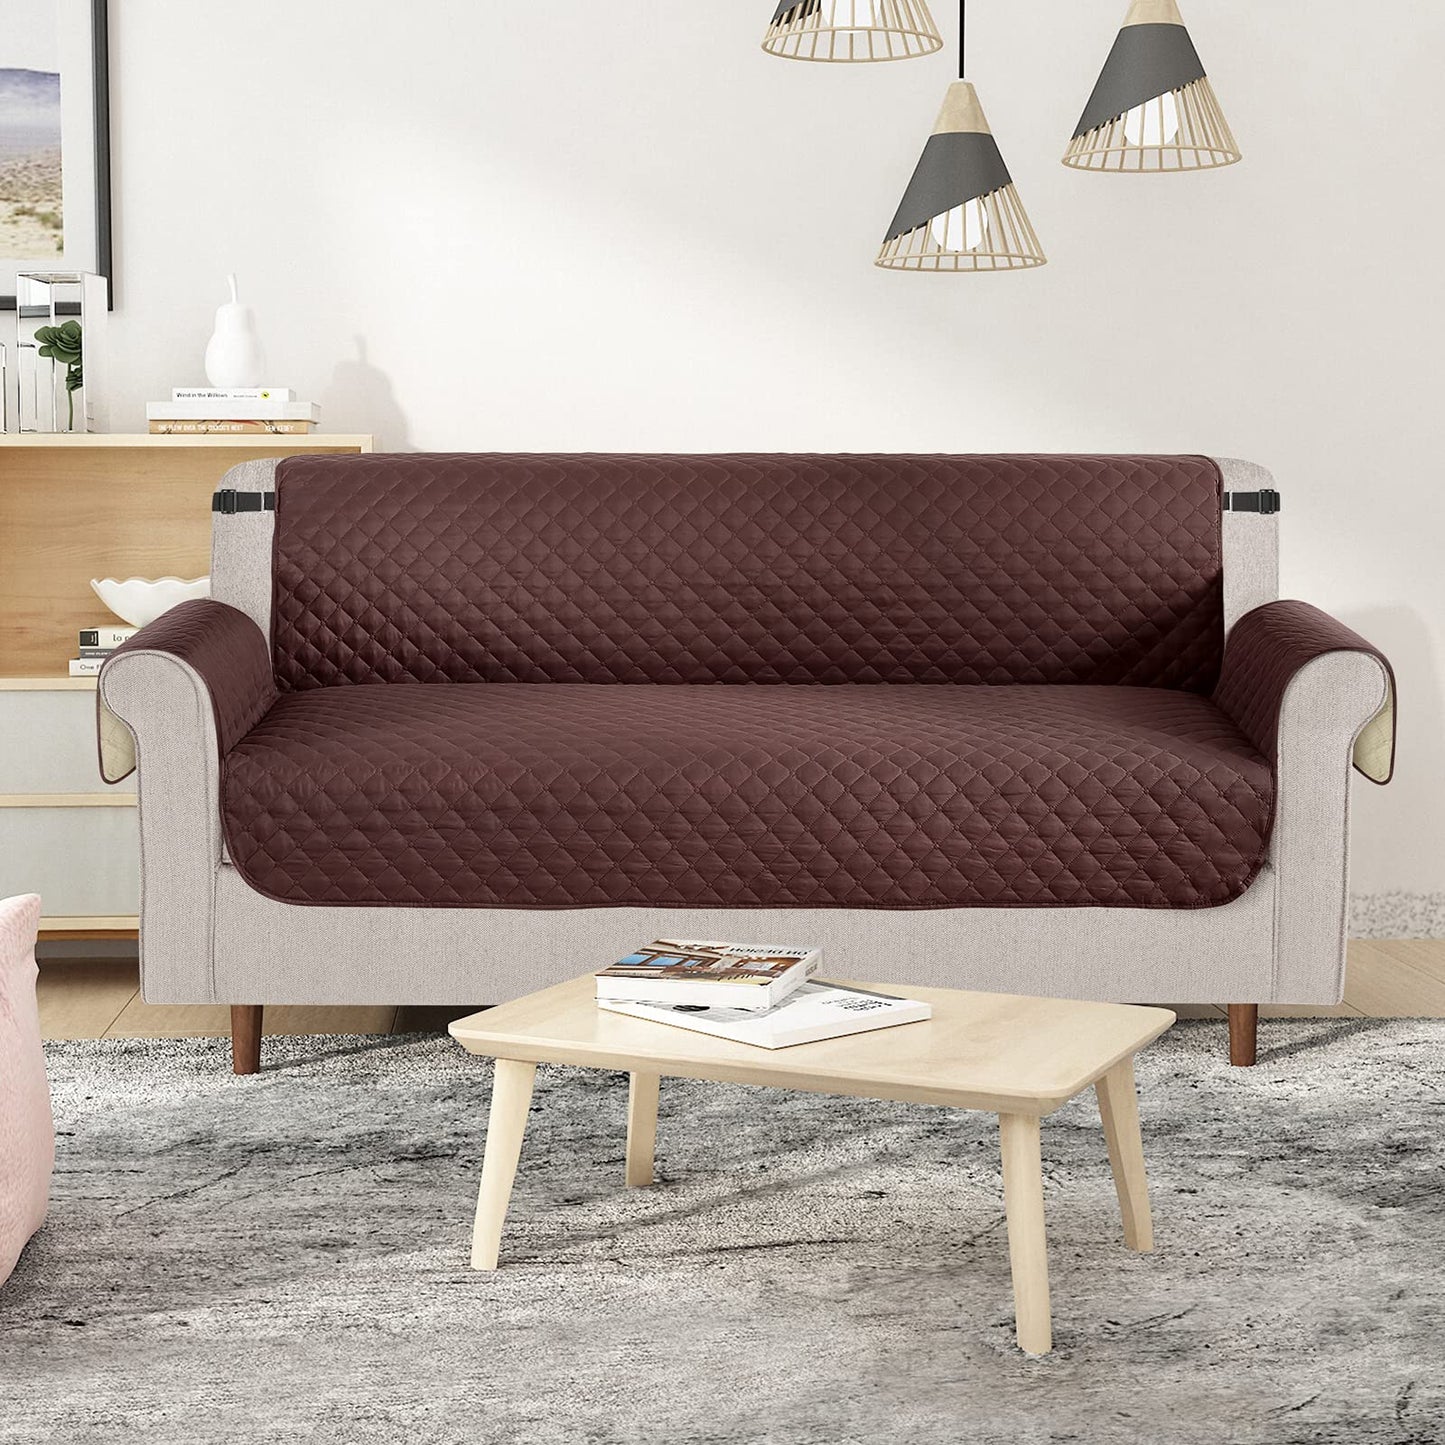 Couch Cover for Leather Sofa (67'' Large) - TAOCOCO